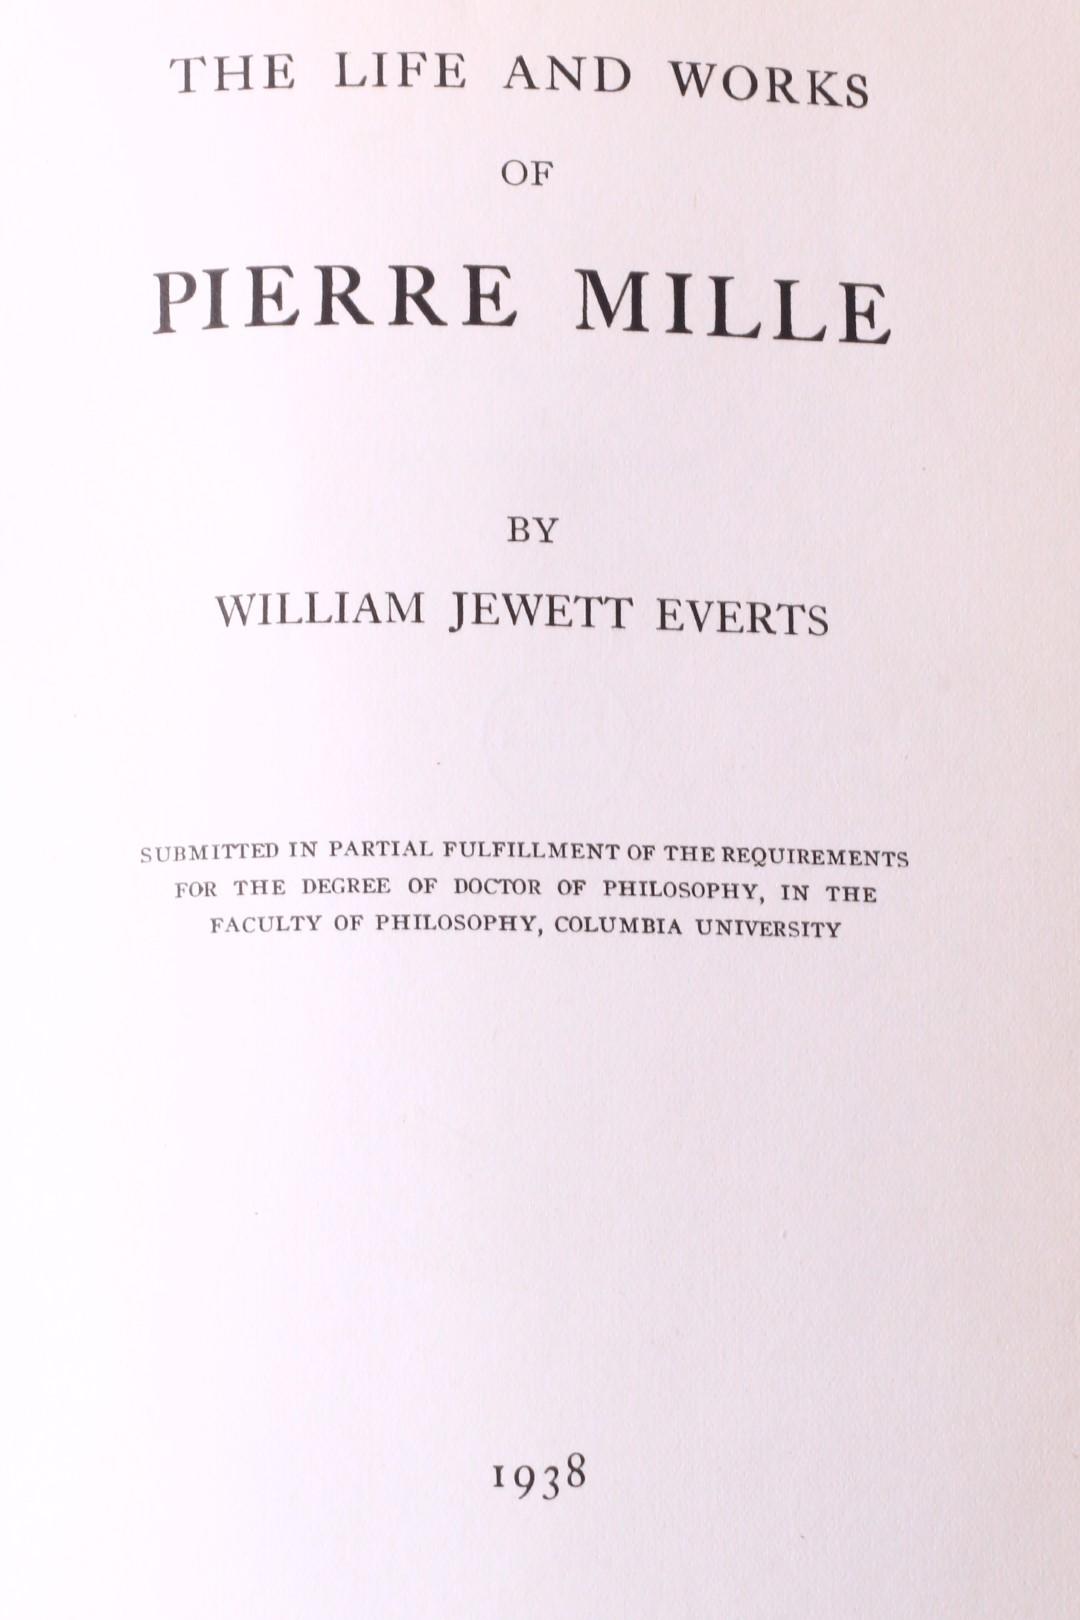 William Jewett Everts - The Life and Words of Pierre Mille - Columbia University, 1938, Manuscript.